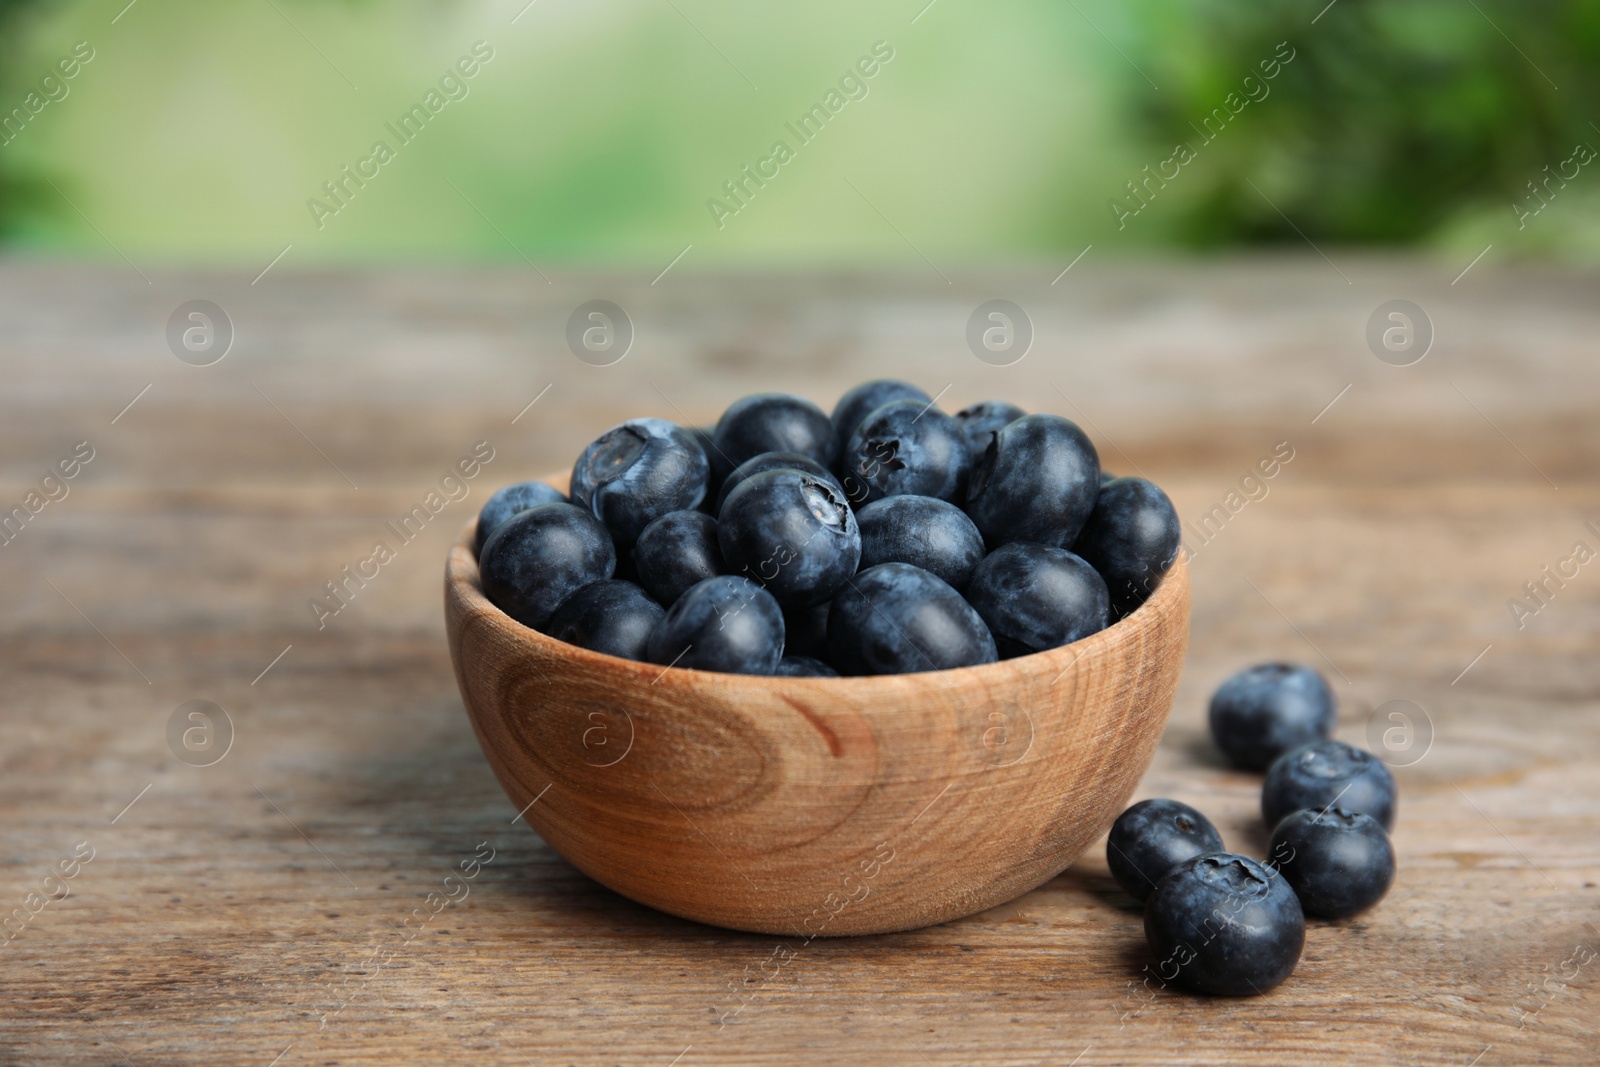 Photo of Bowl of fresh blueberries on wooden table